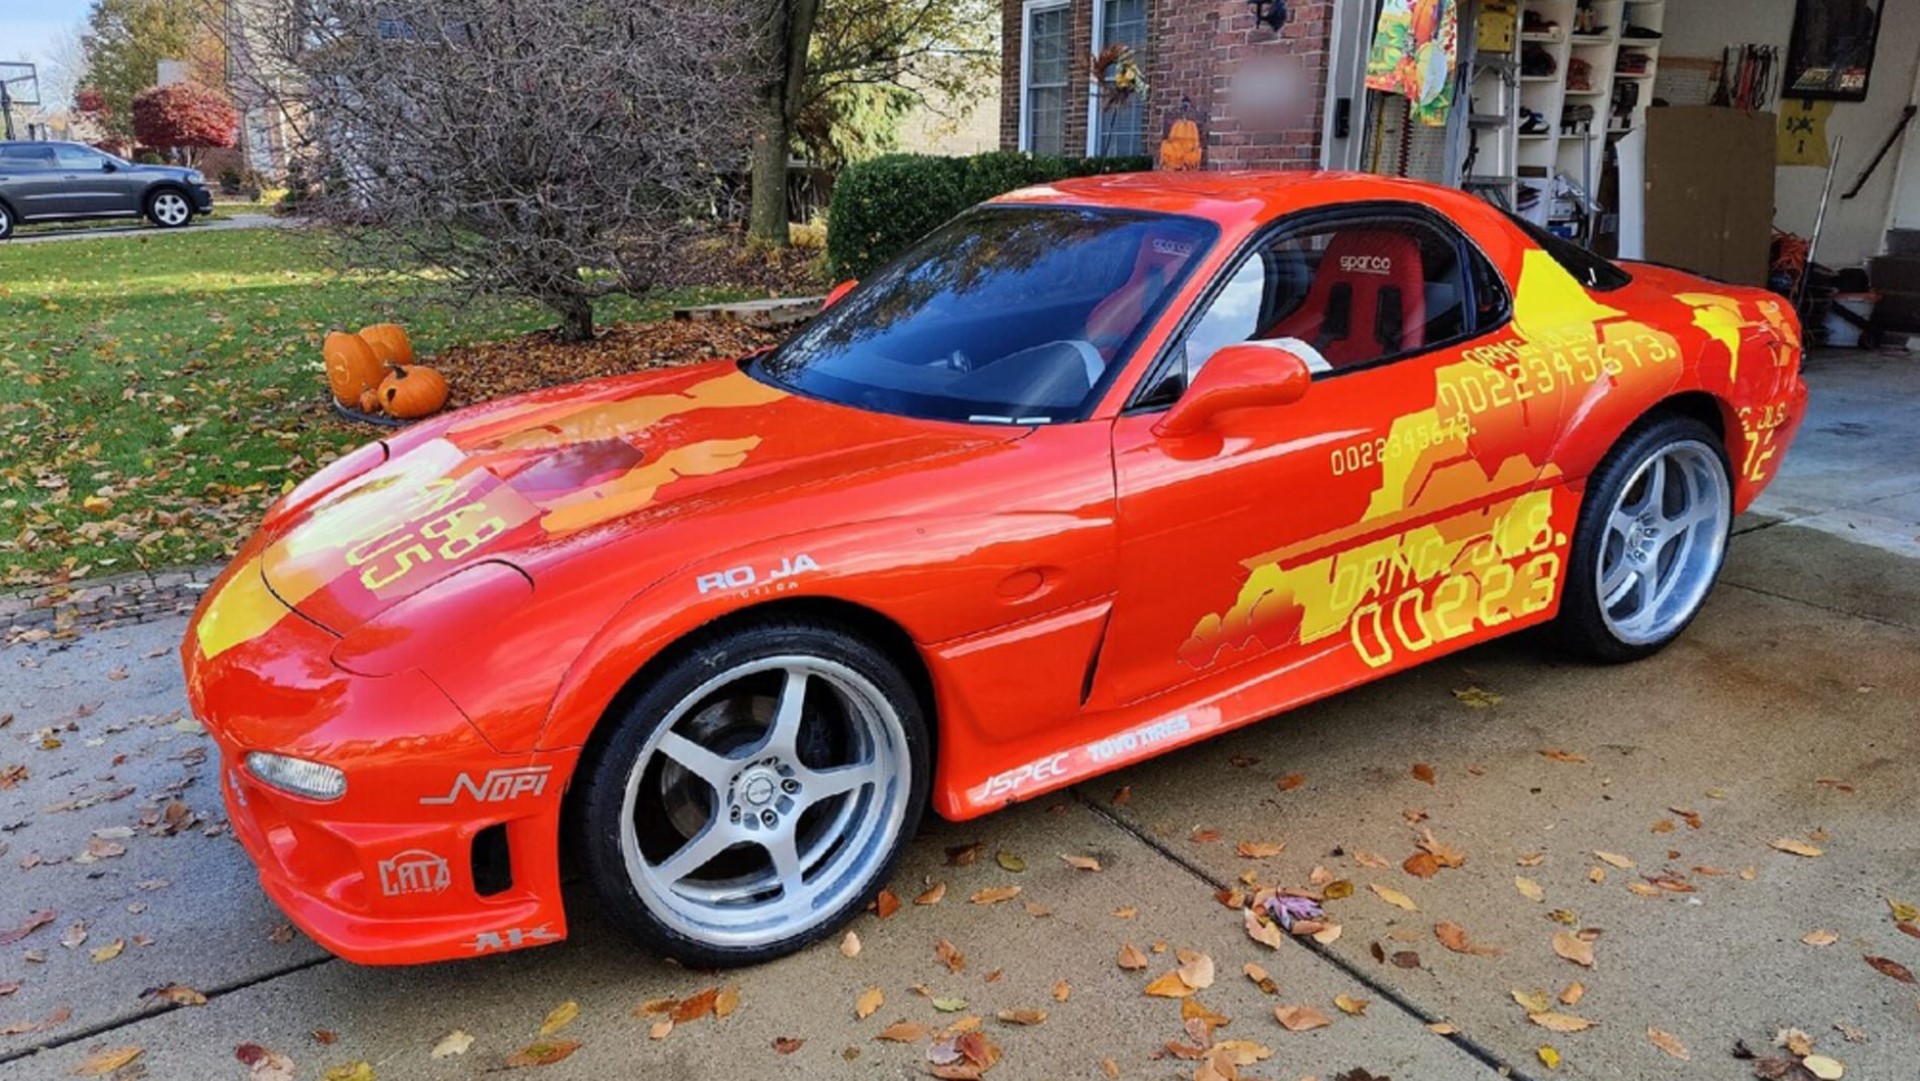 The Original 'Fast and Furious' RX-7 Goes for Sale With a Built-In ...